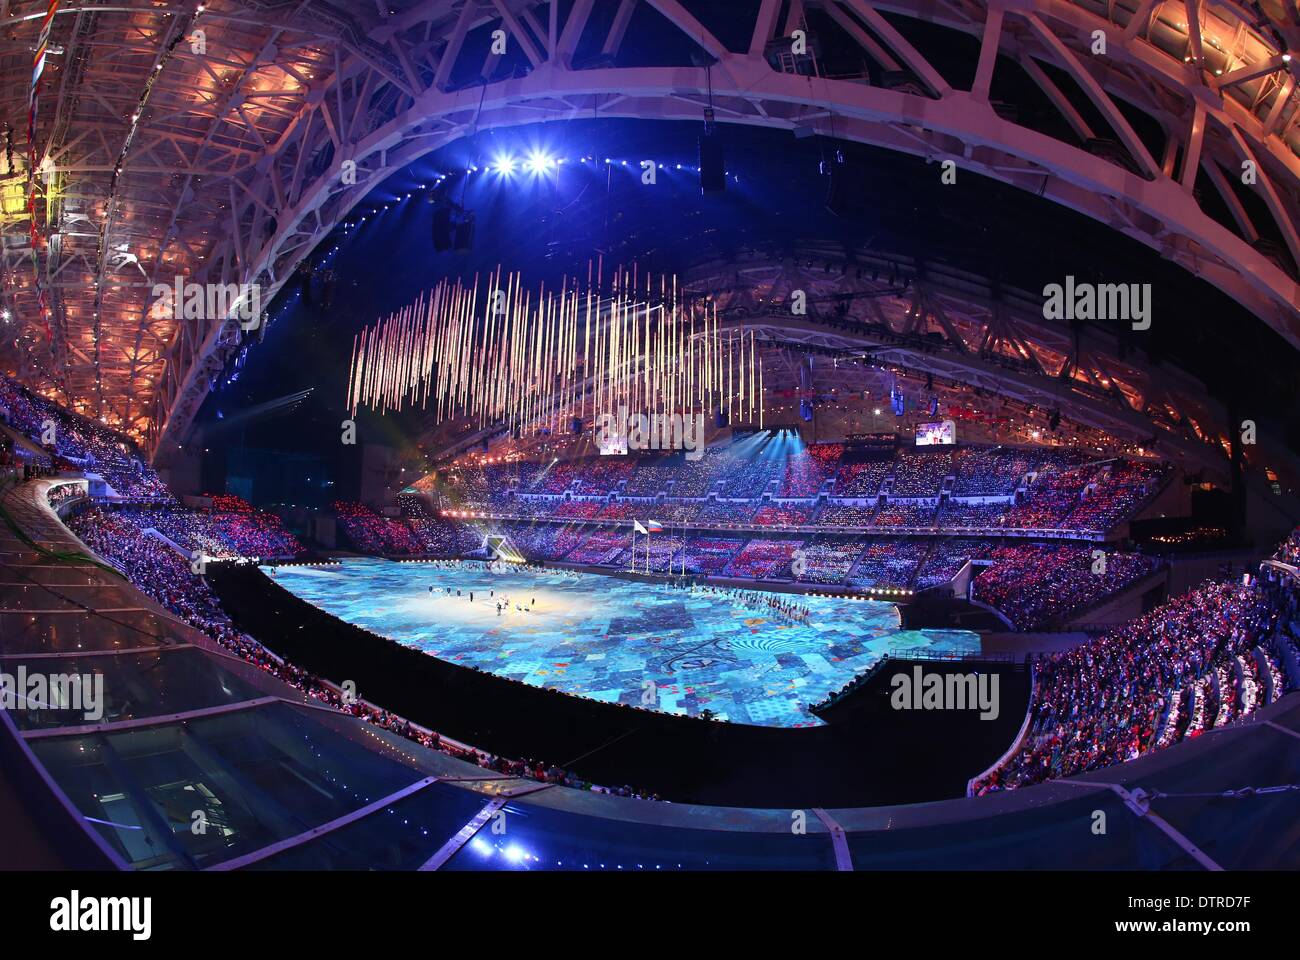 Sochi, Russia. 23rd February 2014. A general view of the arena during the Closing Ceremony in Fisht Olympic Stadium at the Sochi 2014 Olympic Games, Sochi, Russia, 23 February 2014. Photo: Daniel Karmann/dpa/Alamy Live News Stock Photo